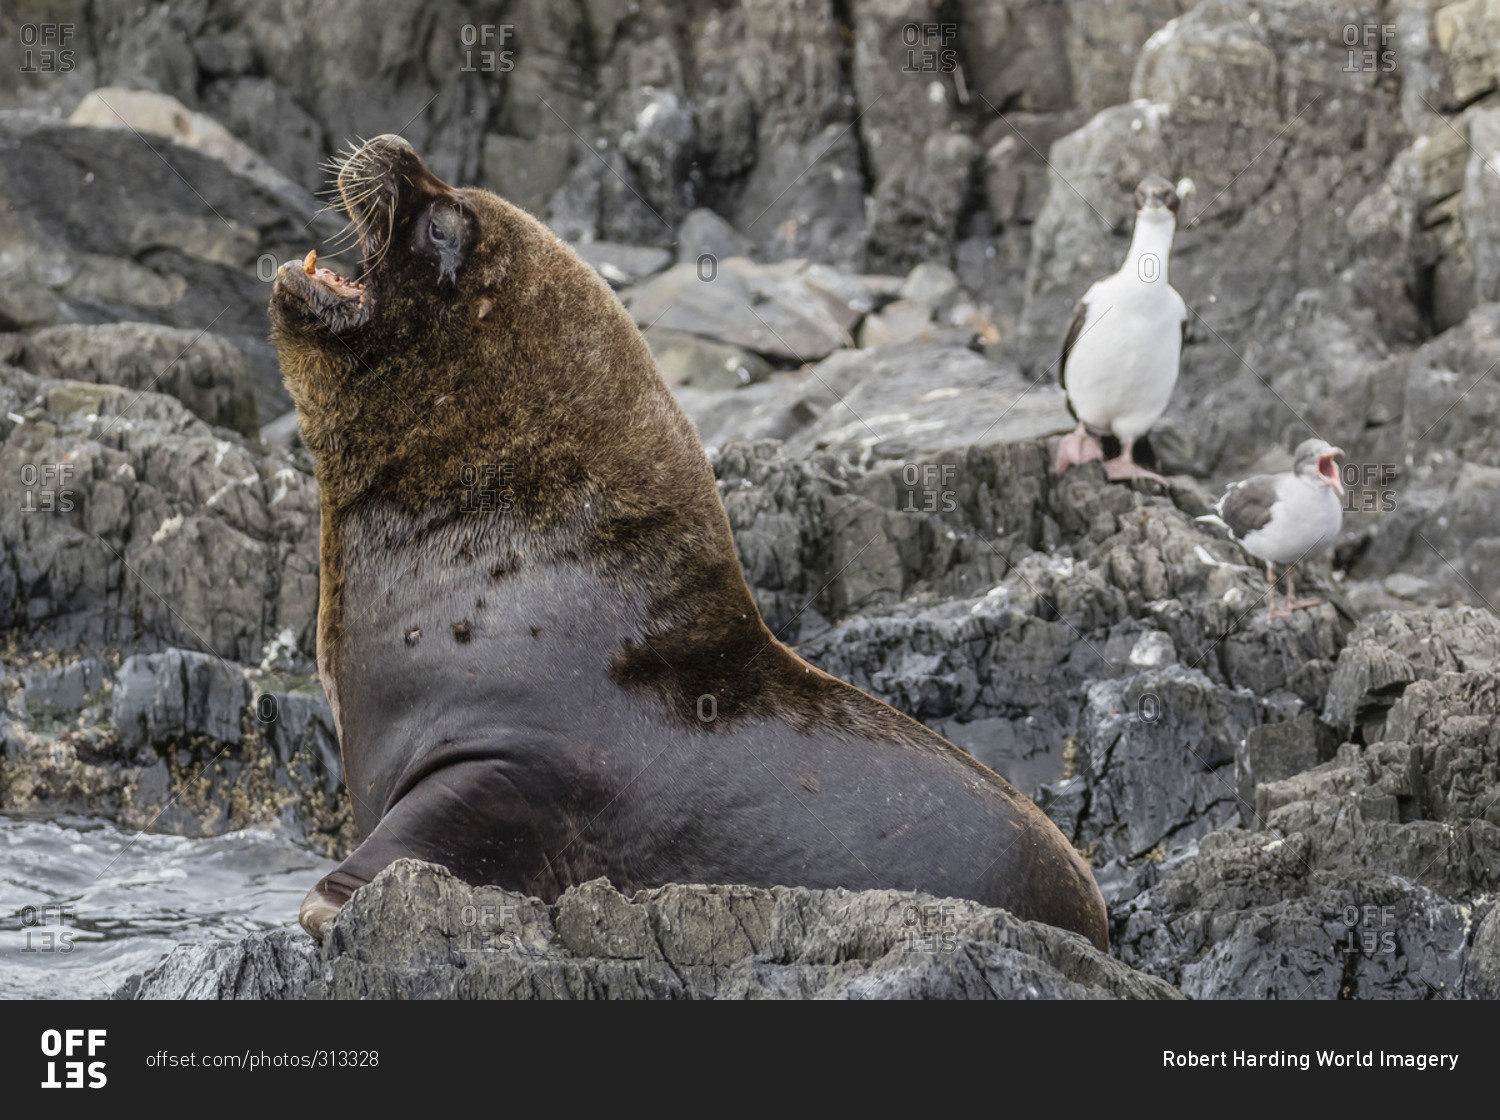 South American sea lion bull (Otaria flavescens) at breeding colony just outside Ushuaia, Beagle Channel, Argentina